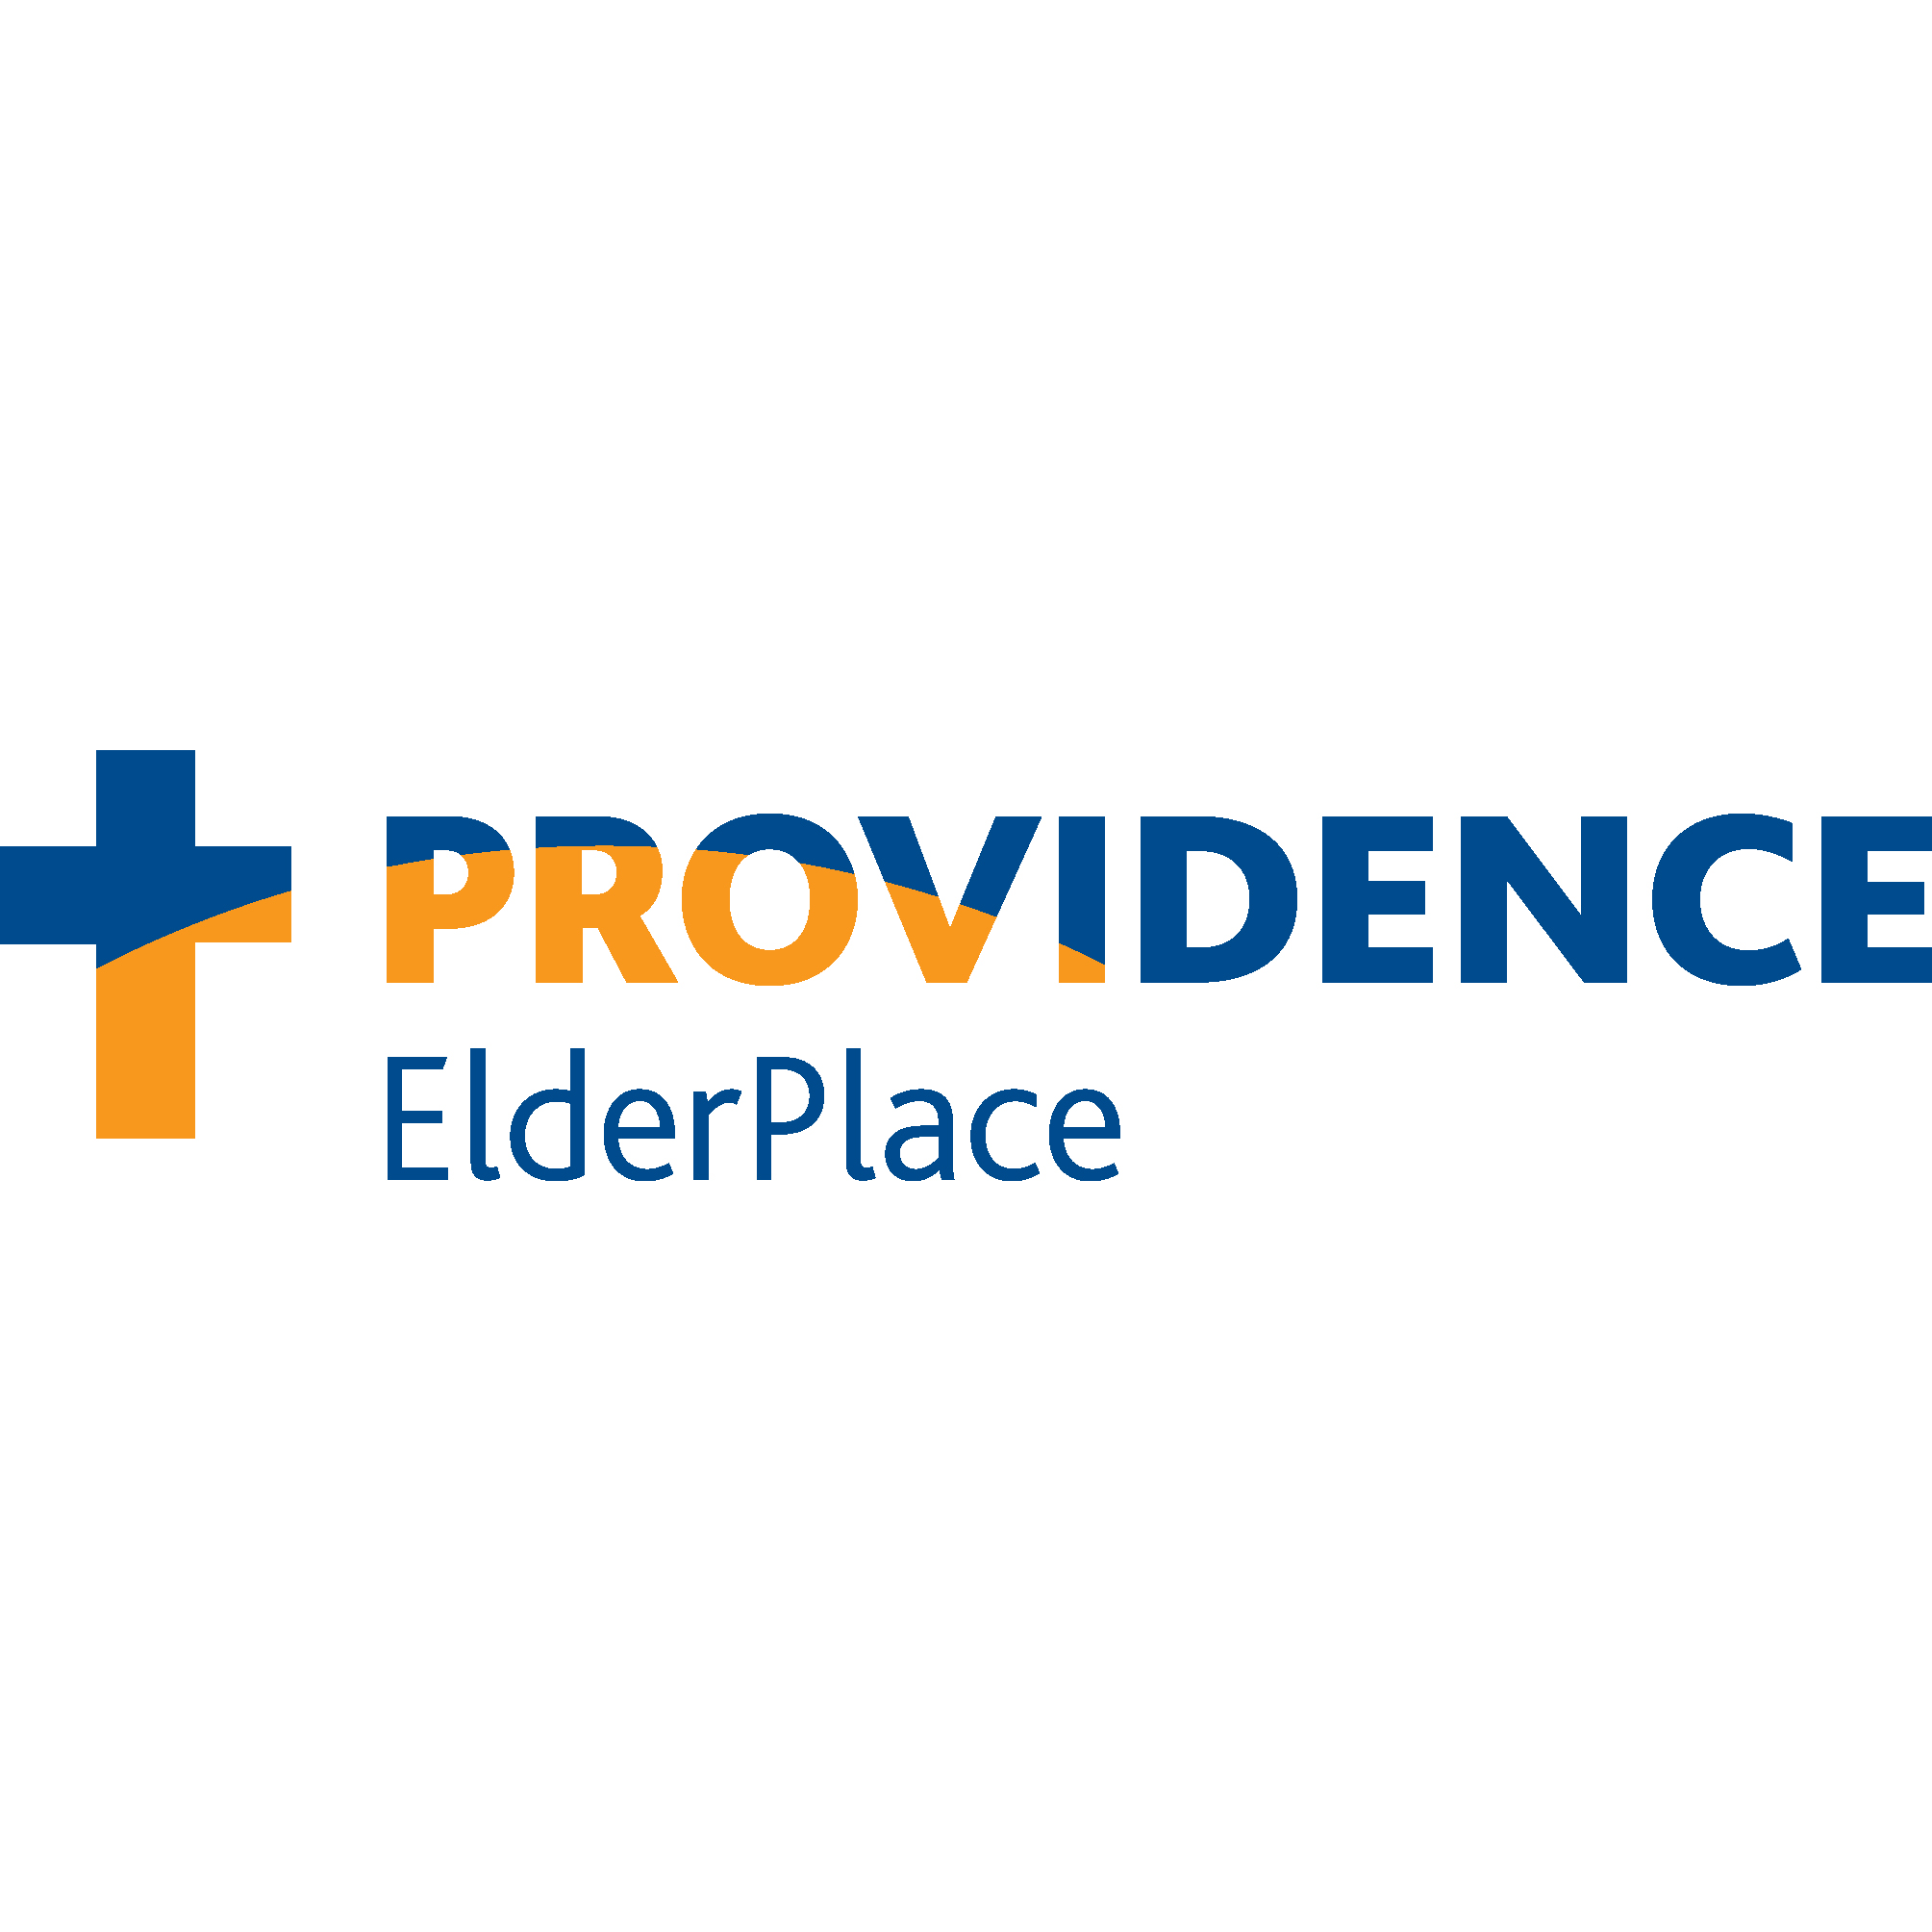 Providence ElderPlace - Cully Photo